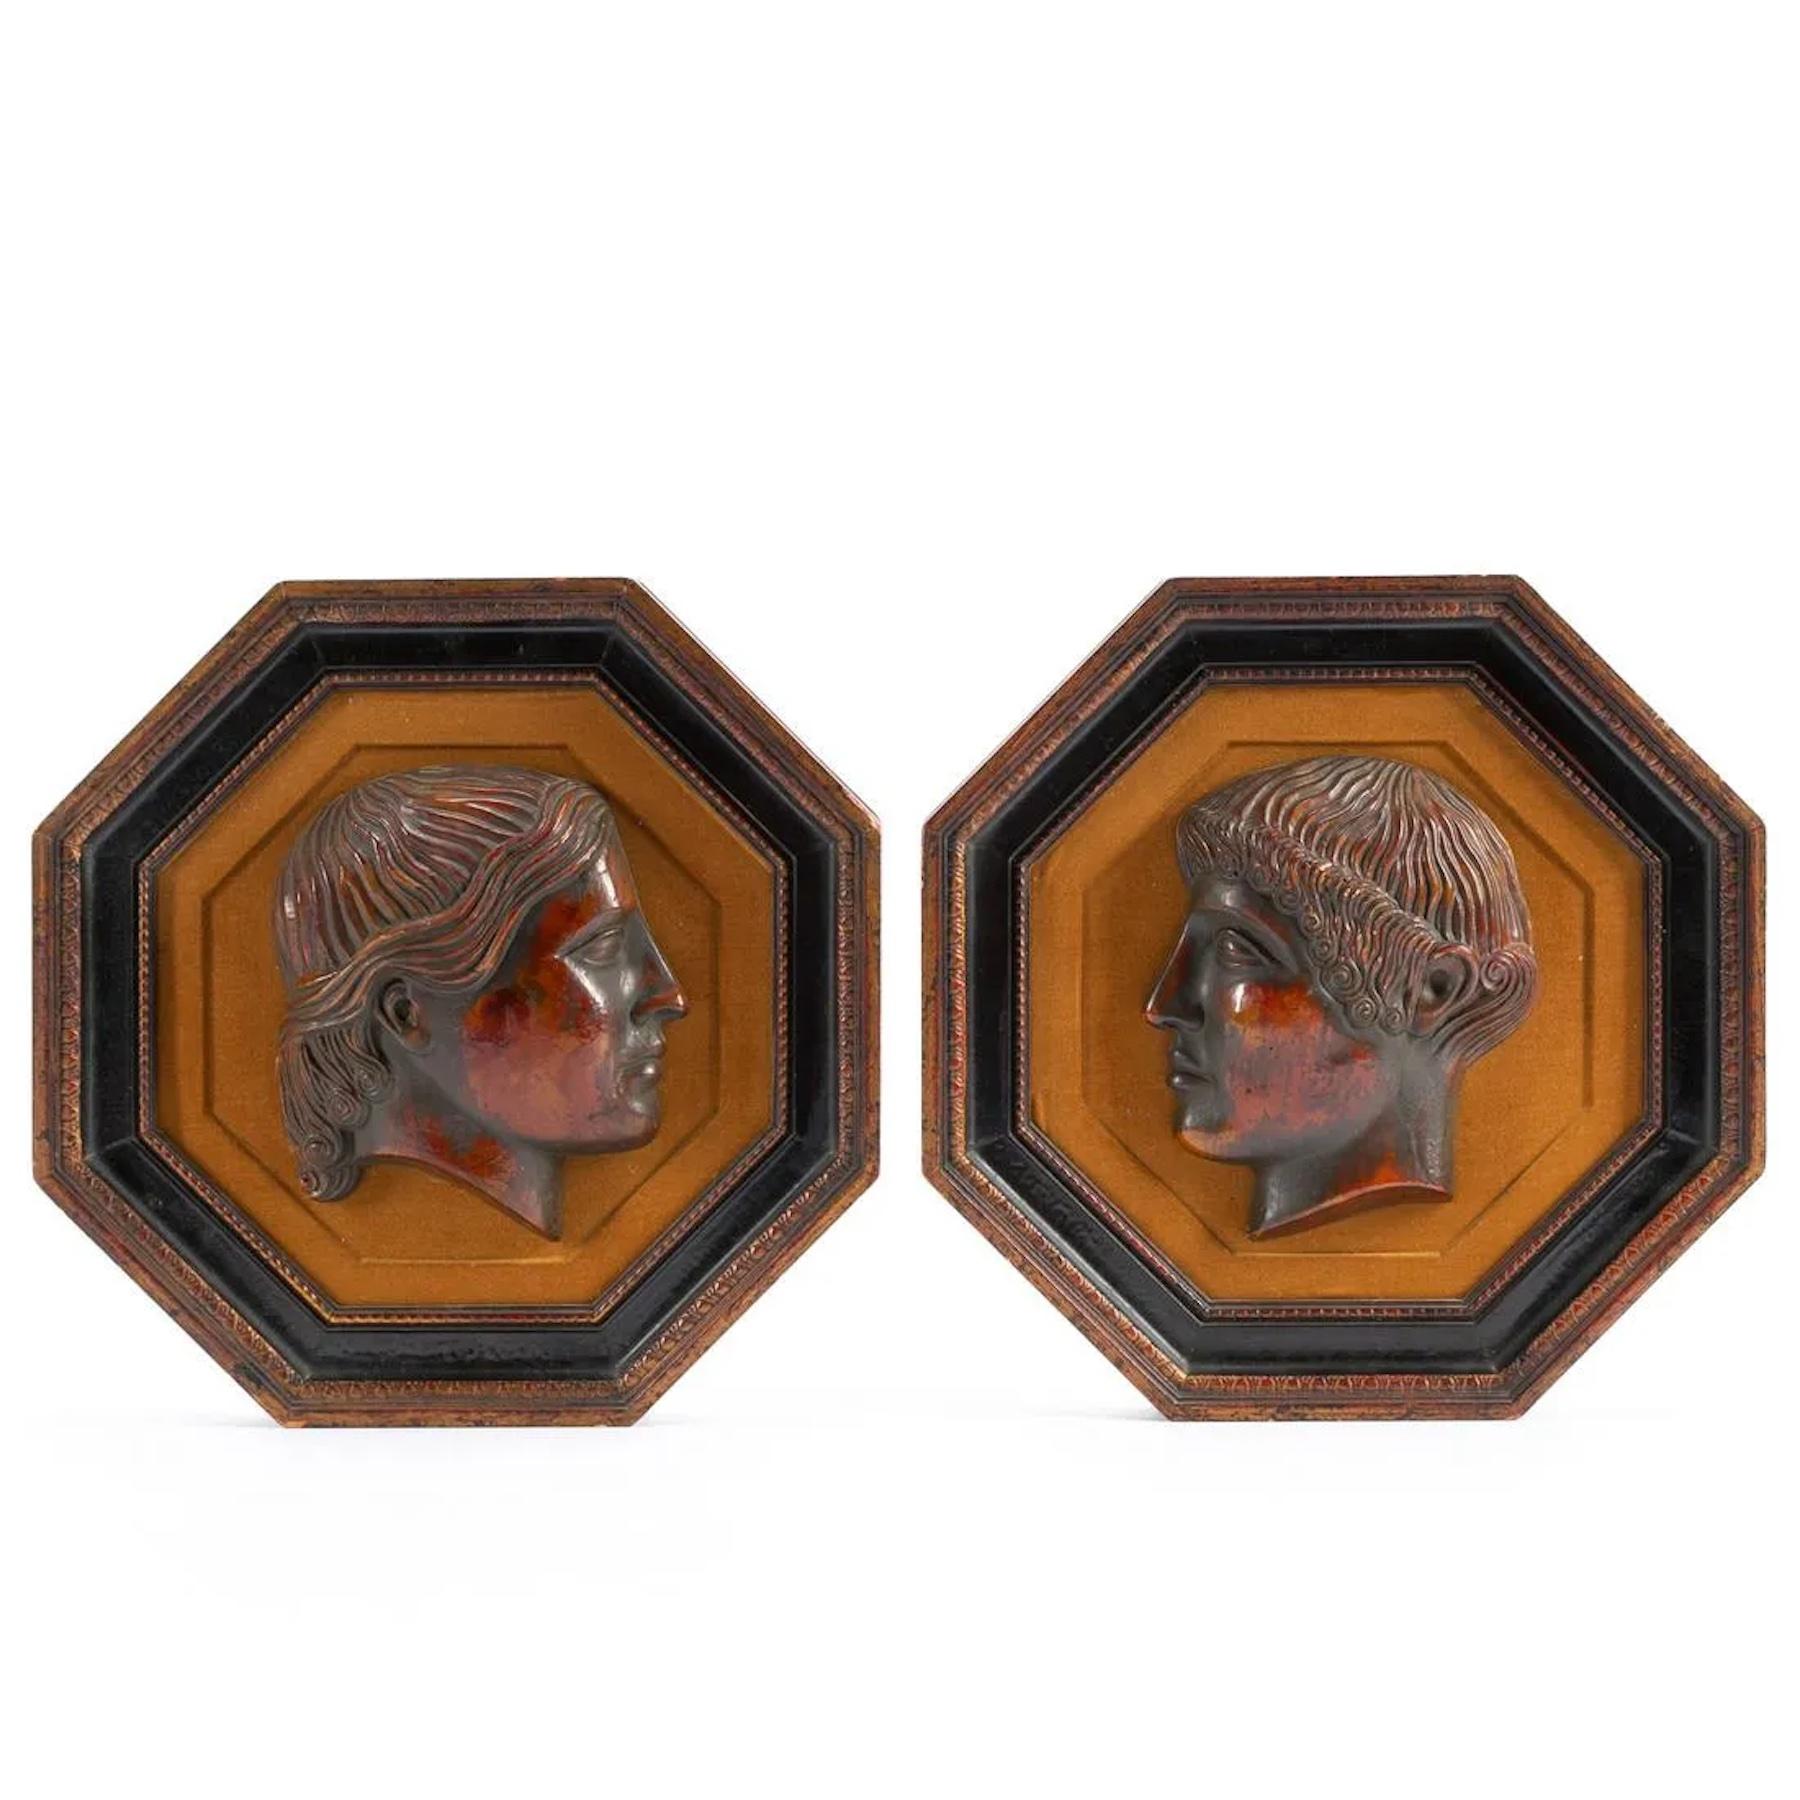 Pair of Octagonal framed 'Pompeiian Red' pottery Roman Medallions 
Each one a well executed glazed pottery male profile portrait medallion, with a vintage custom octagonal frame with velvet mat. 
Medallions alone measure 6' W x 7.5